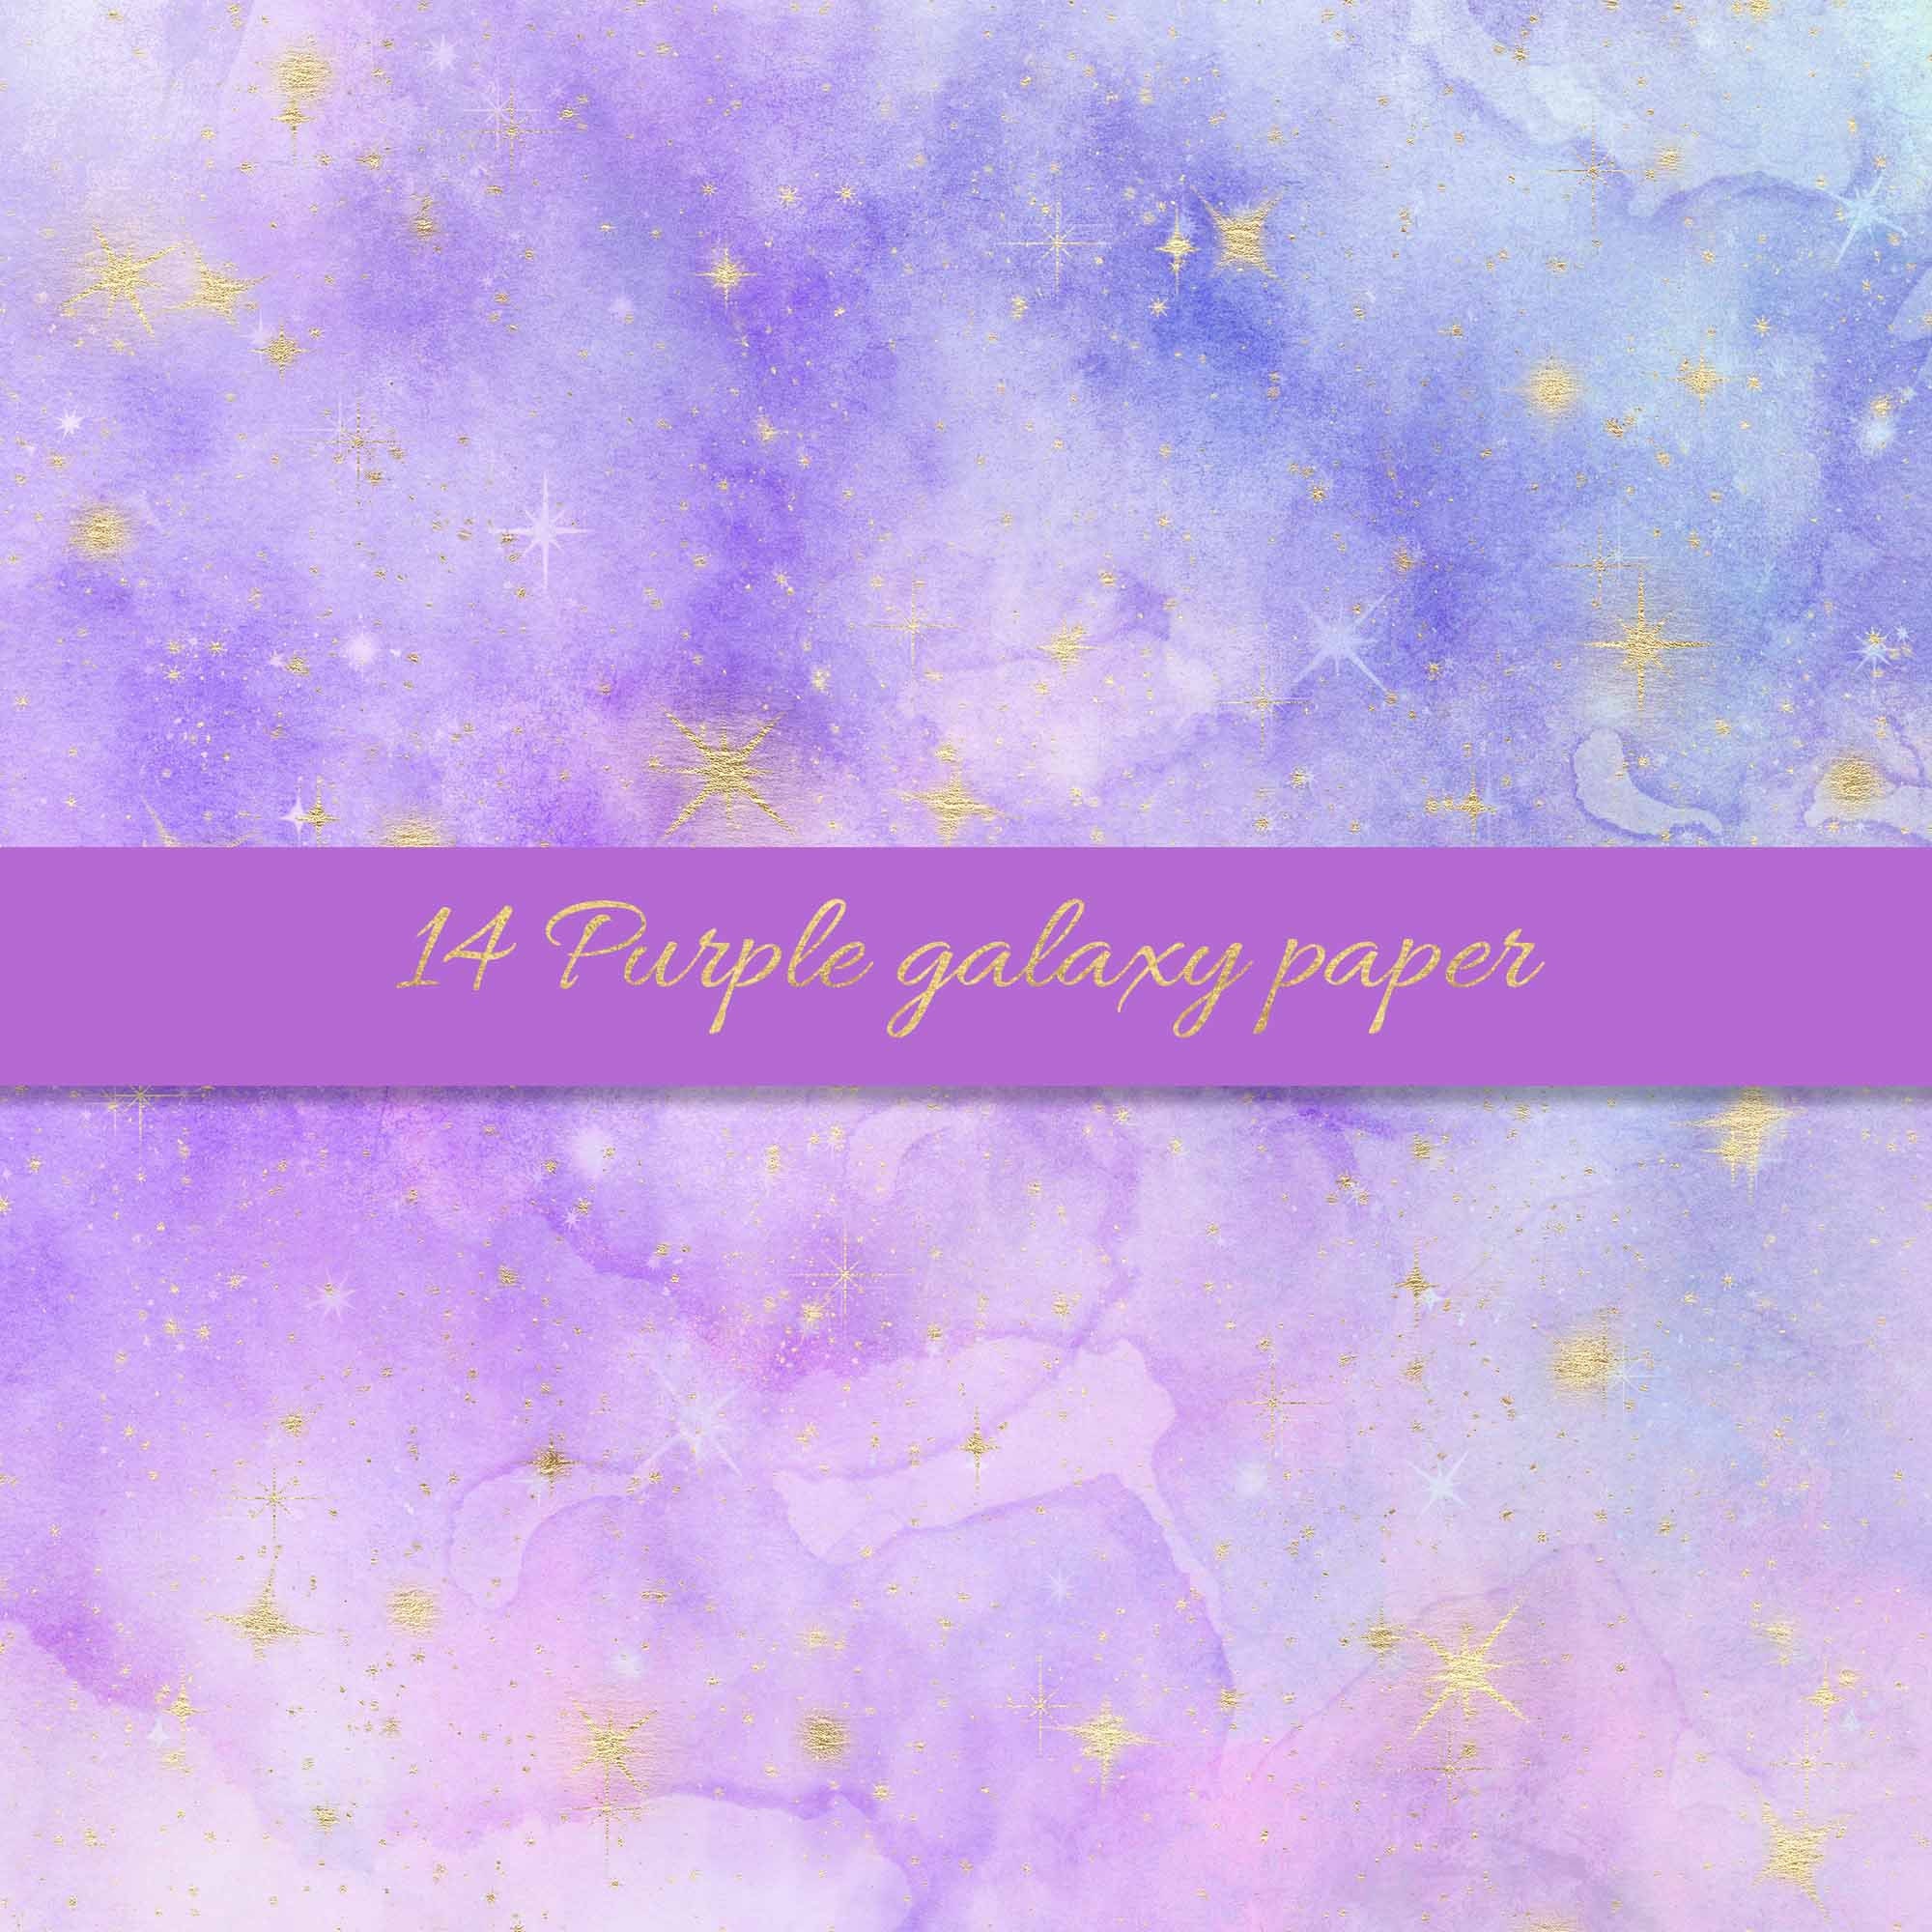 Pastel Pink Digital Paper, Galaxy Background, Pink Watercolor Texture,  Unicorn Paper, Pastel Backdrop, Pink Textures, Nebula Paper, Ink Wash 